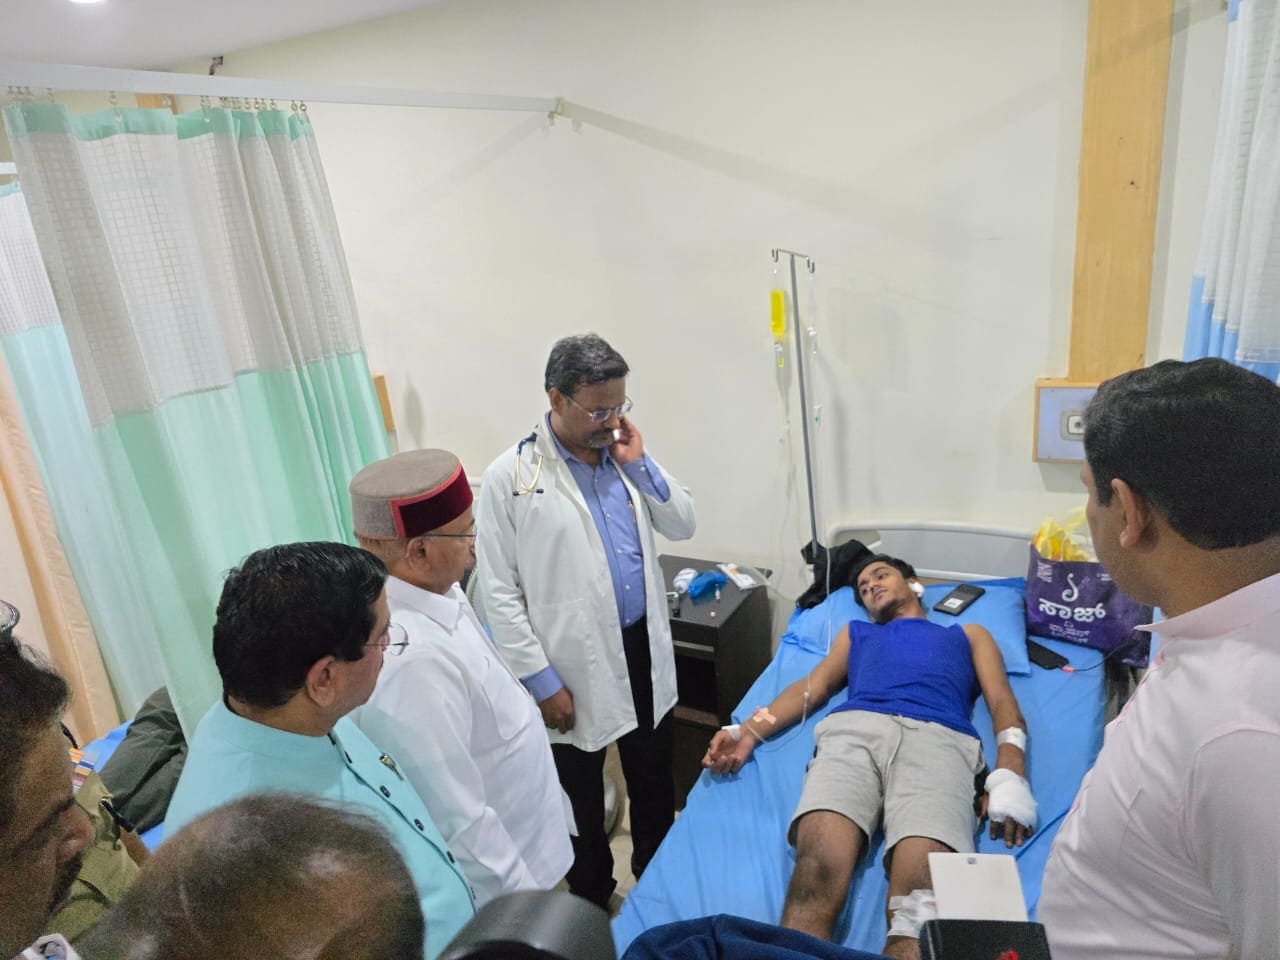 Karnataka Governor Thaawar Chand Gehlot visited the injured on Friday. At least 10 people were injured in the low-intensity blast. (Supplied)